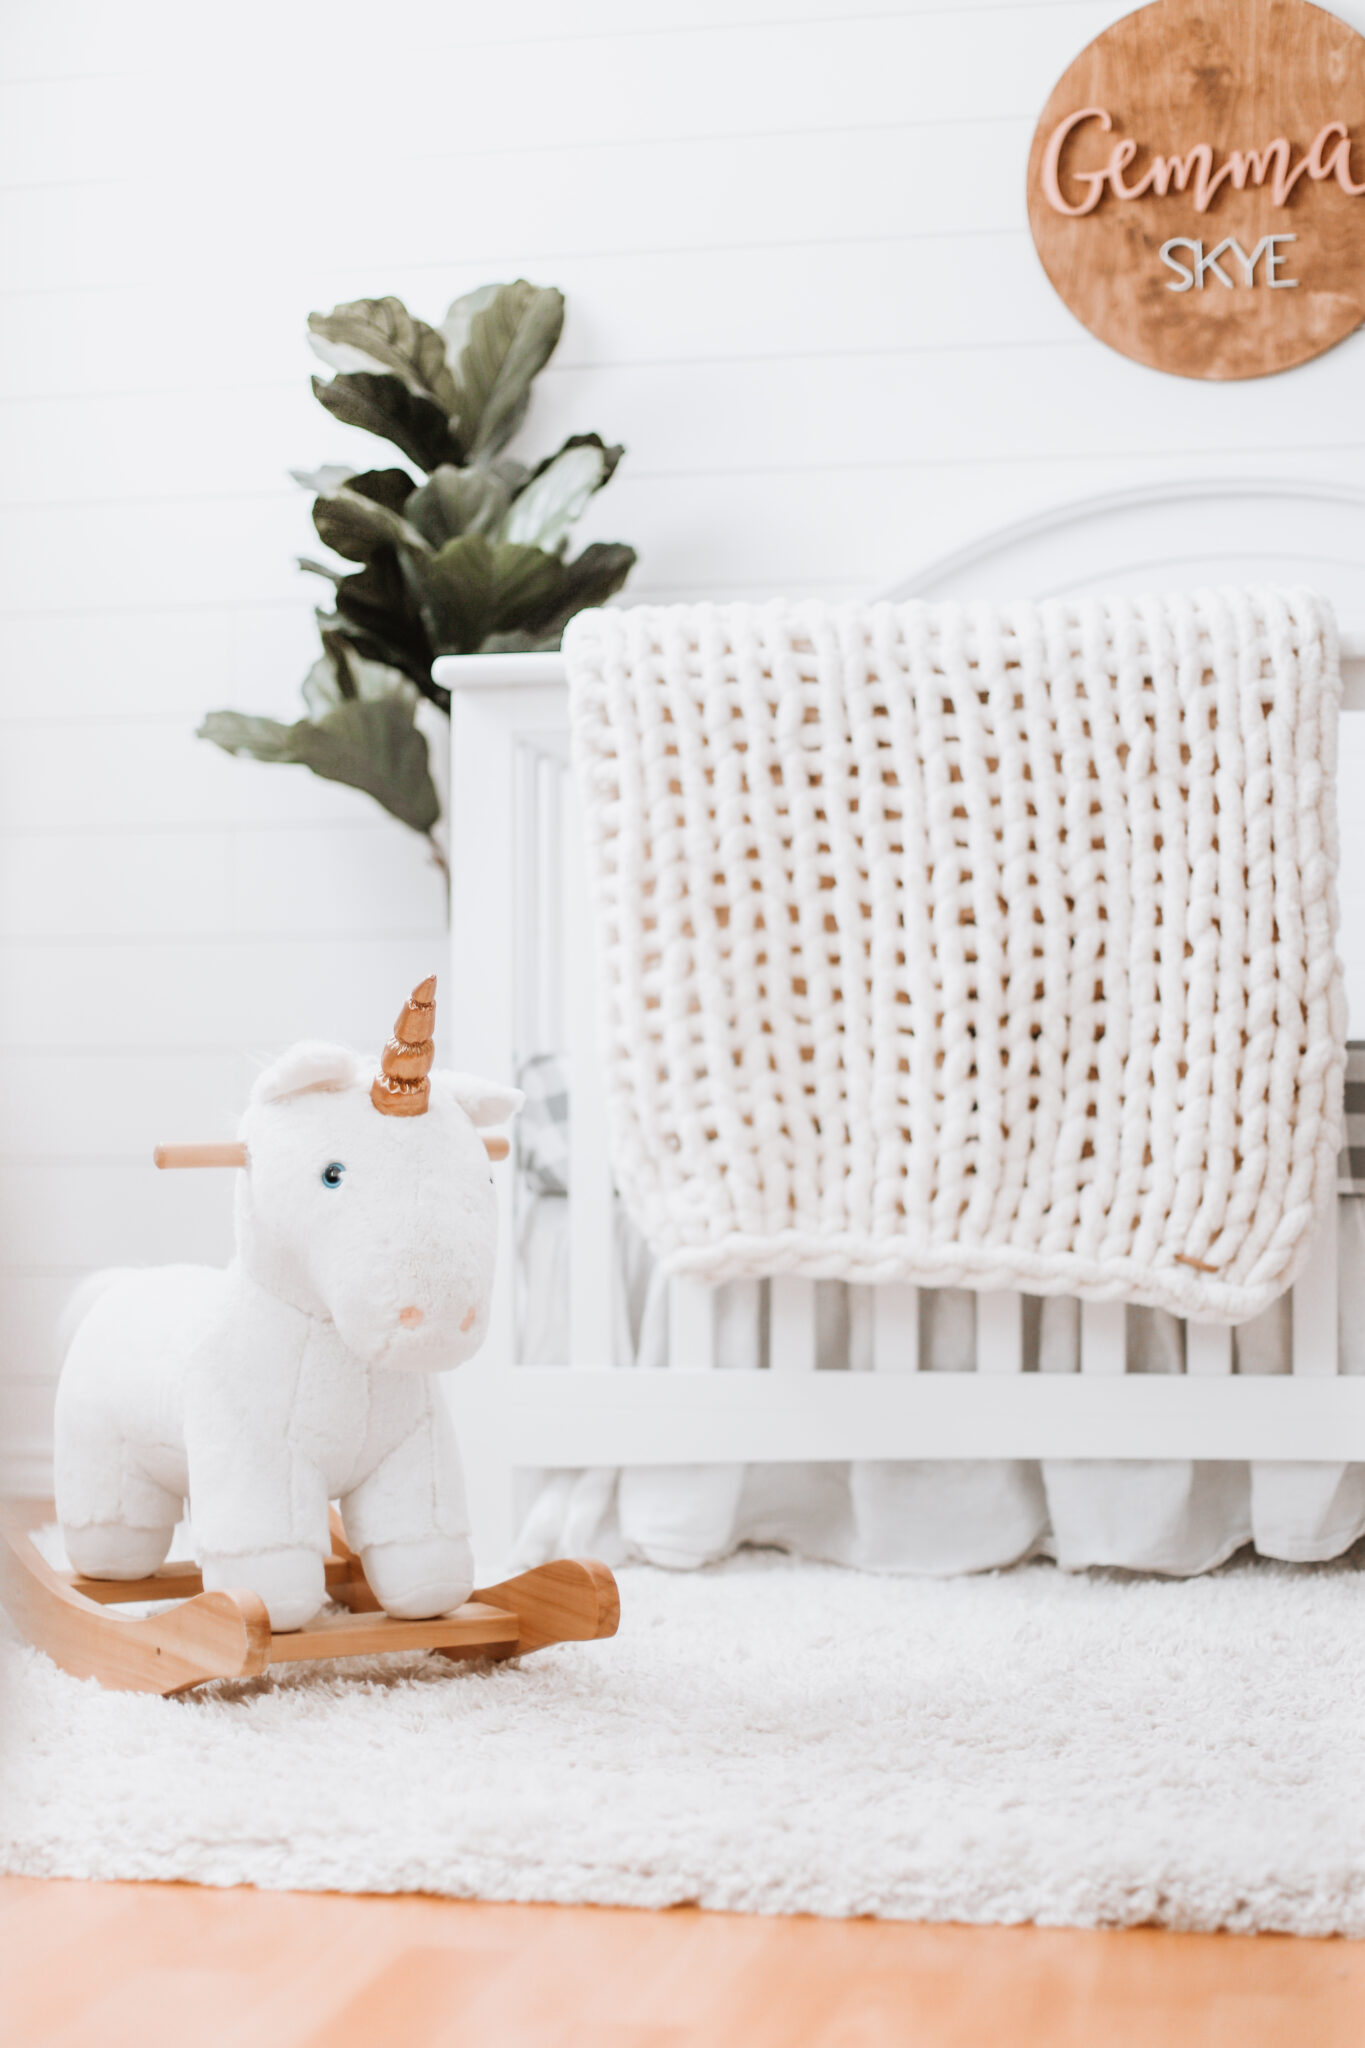 Our baby girl's nursery reveal is here! A sweet and simple modern farmhouse design with a shiplap accent wall and neutral decor. Here are all of the details! Gender Neutral | Farmhouse Nursery | Shiplap Crib | All White Nursery | Baby's Name | Wooden Sign | Chunky Knit Chenille Blanket | Home Design | Interior | Northern Living | Canadian Living | Canadian Small Shops | Small Businesses | Baby's Room |